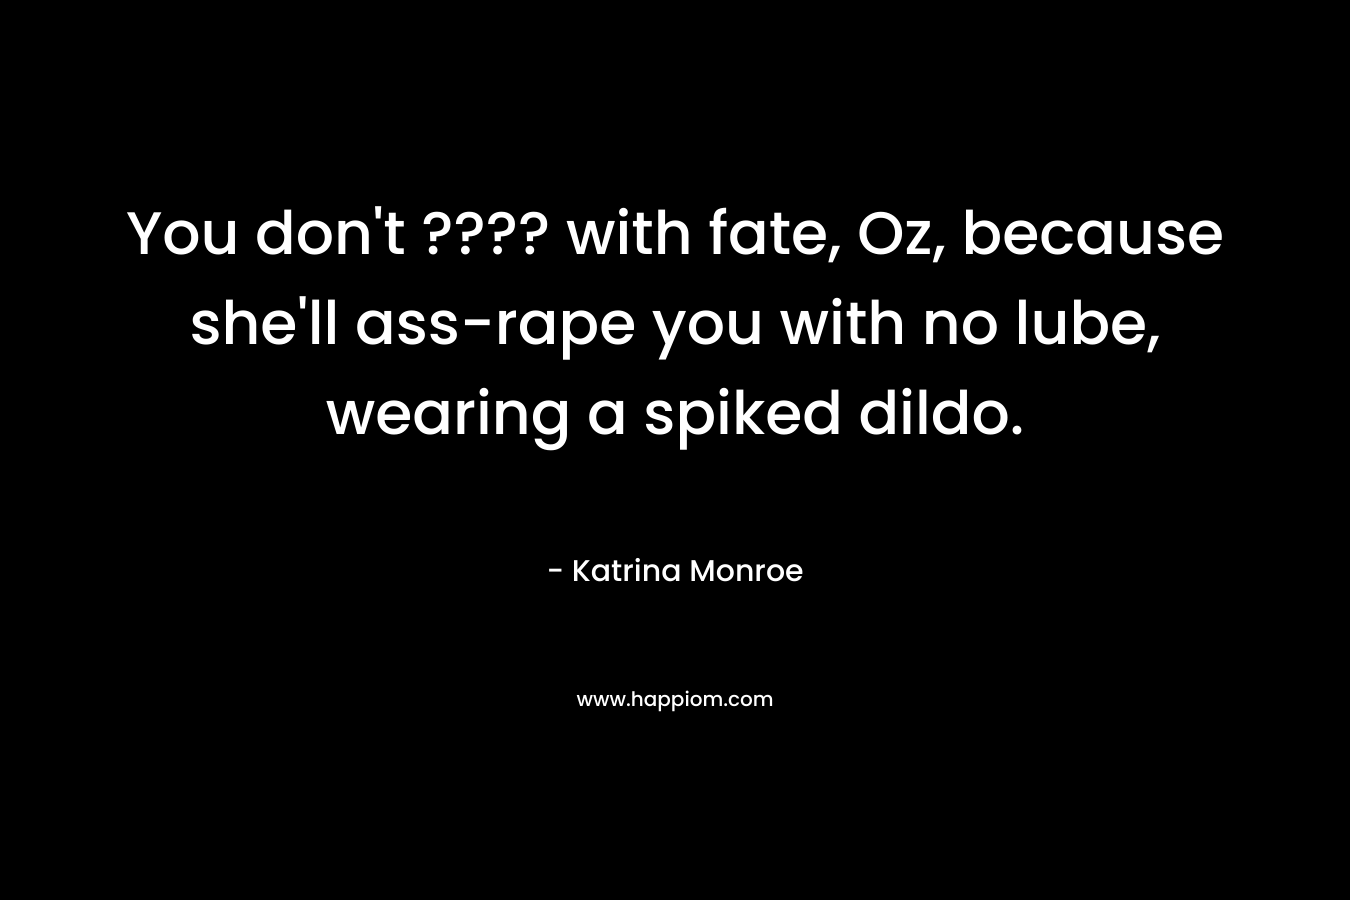 You don't ???? with fate, Oz, because she'll ass-rape you with no lube, wearing a spiked dildo.